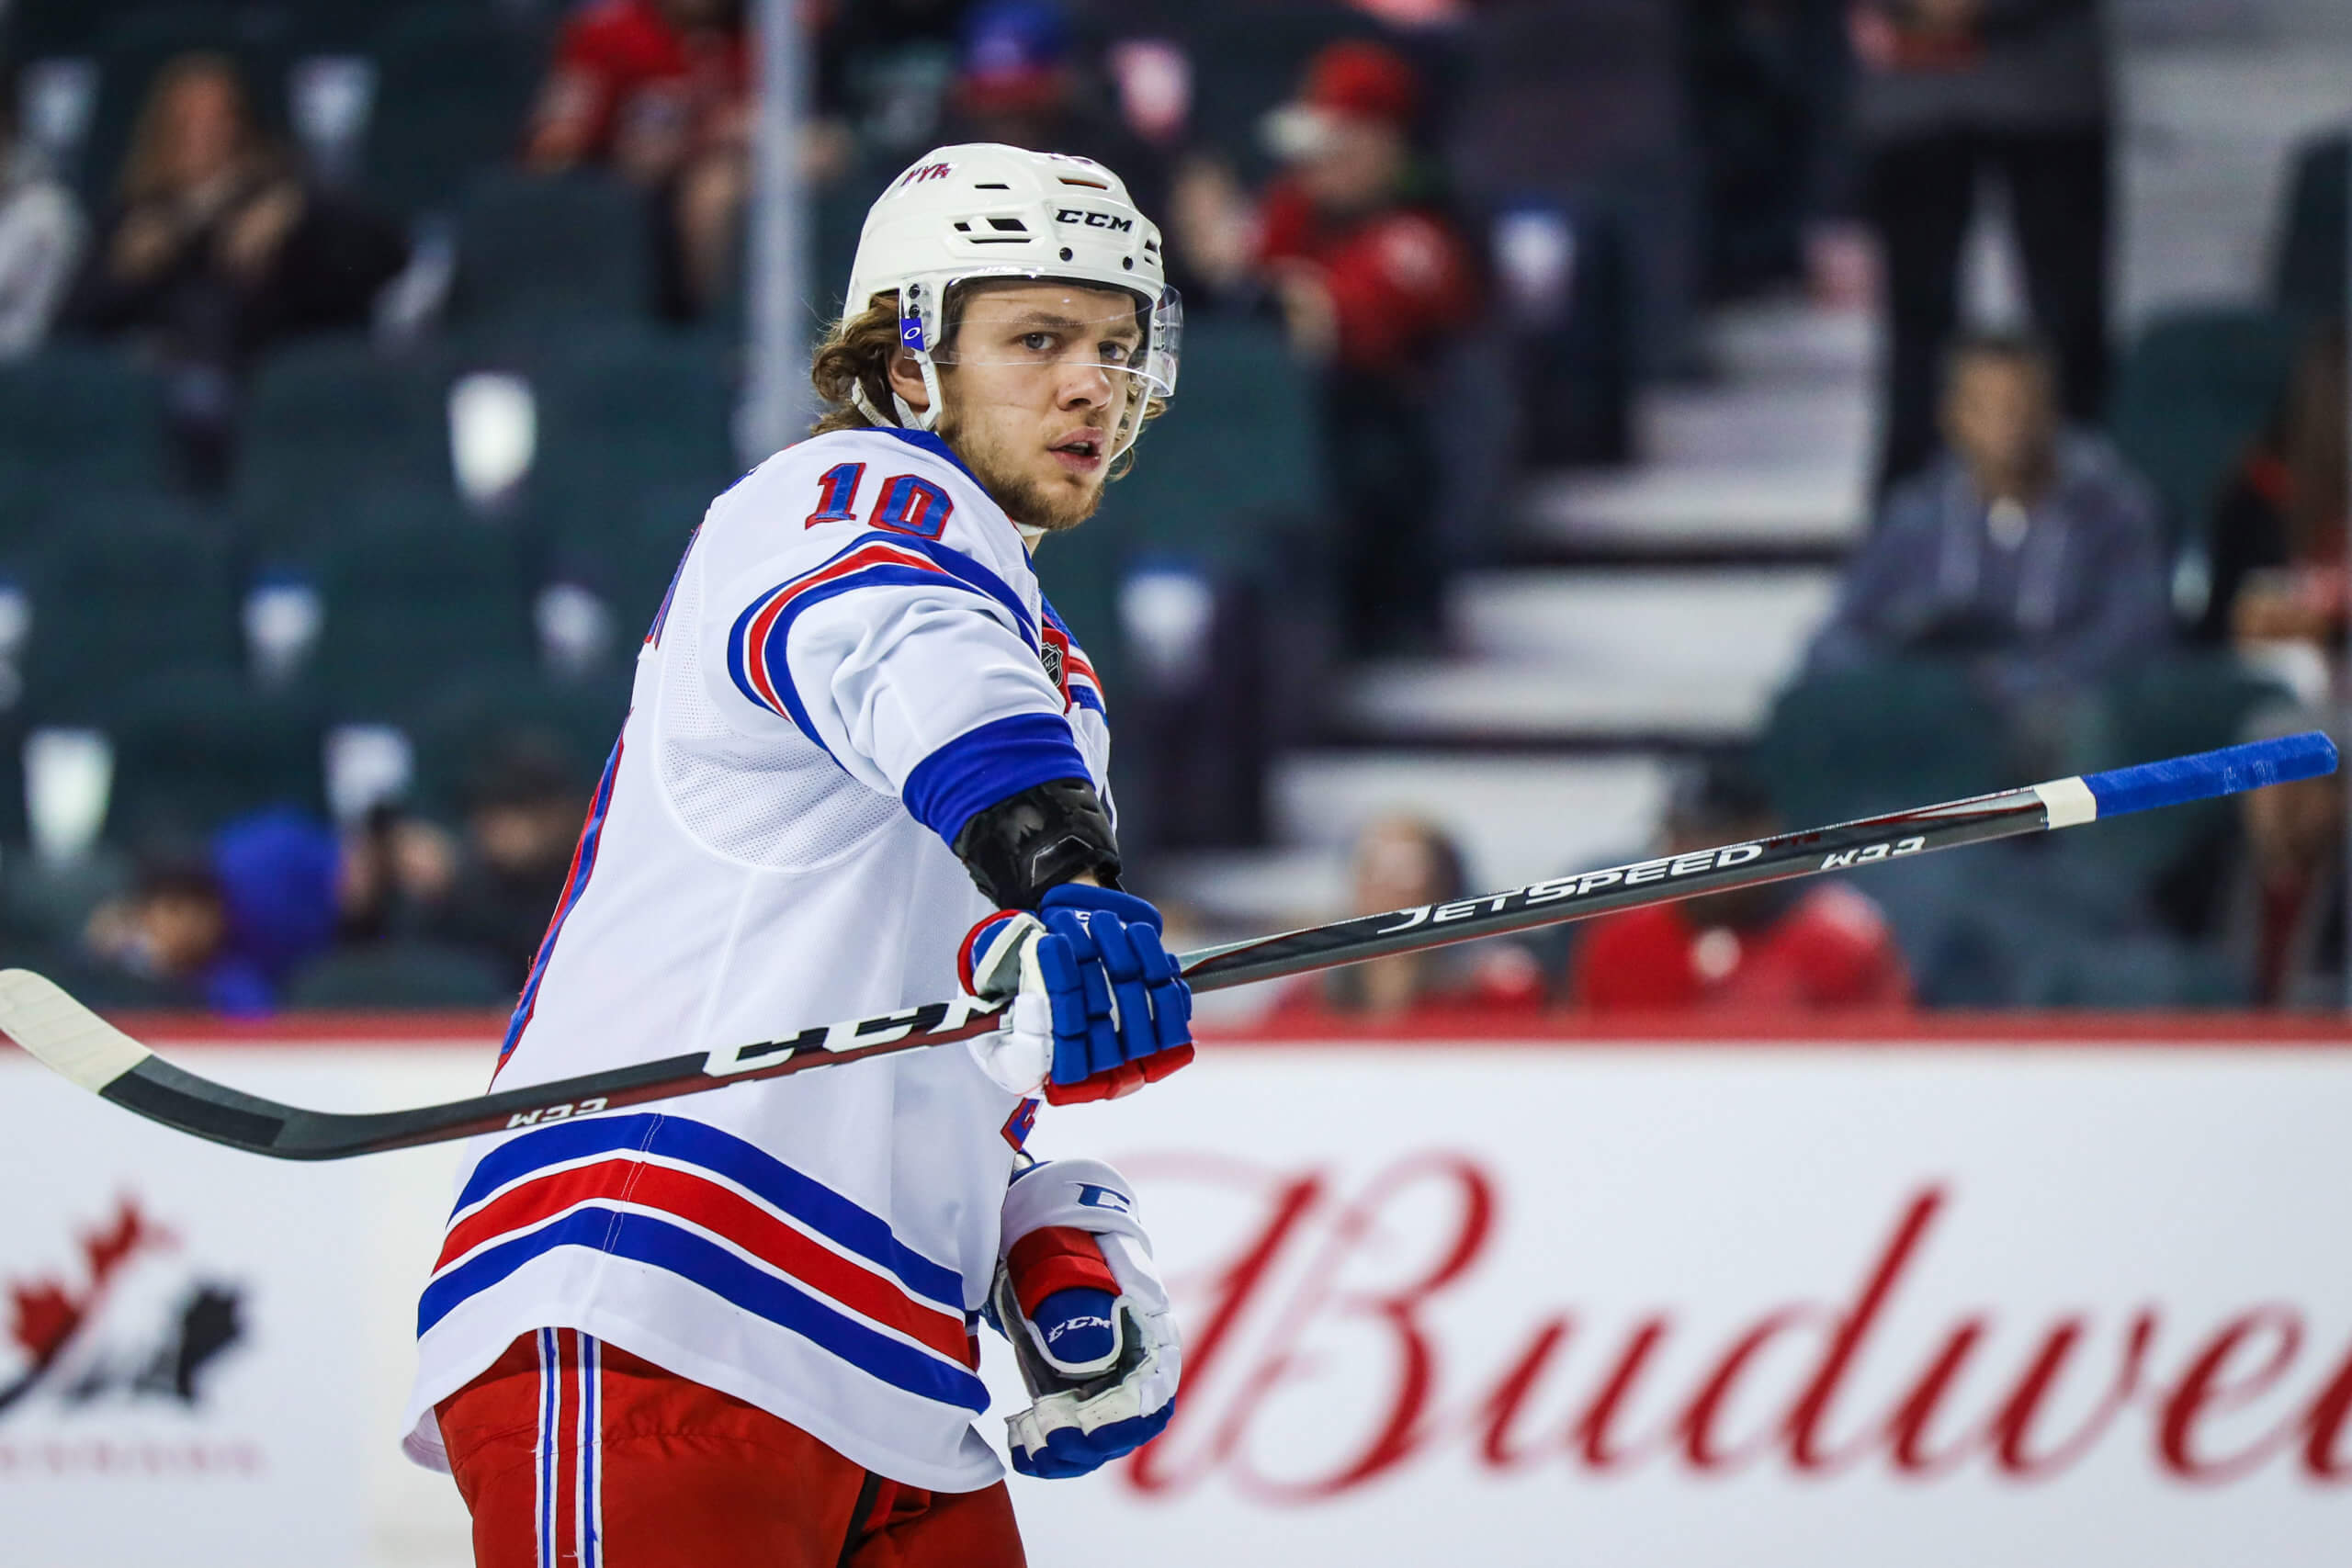 Thoughts on the Artemi Panarin leave of absence from the Rangers